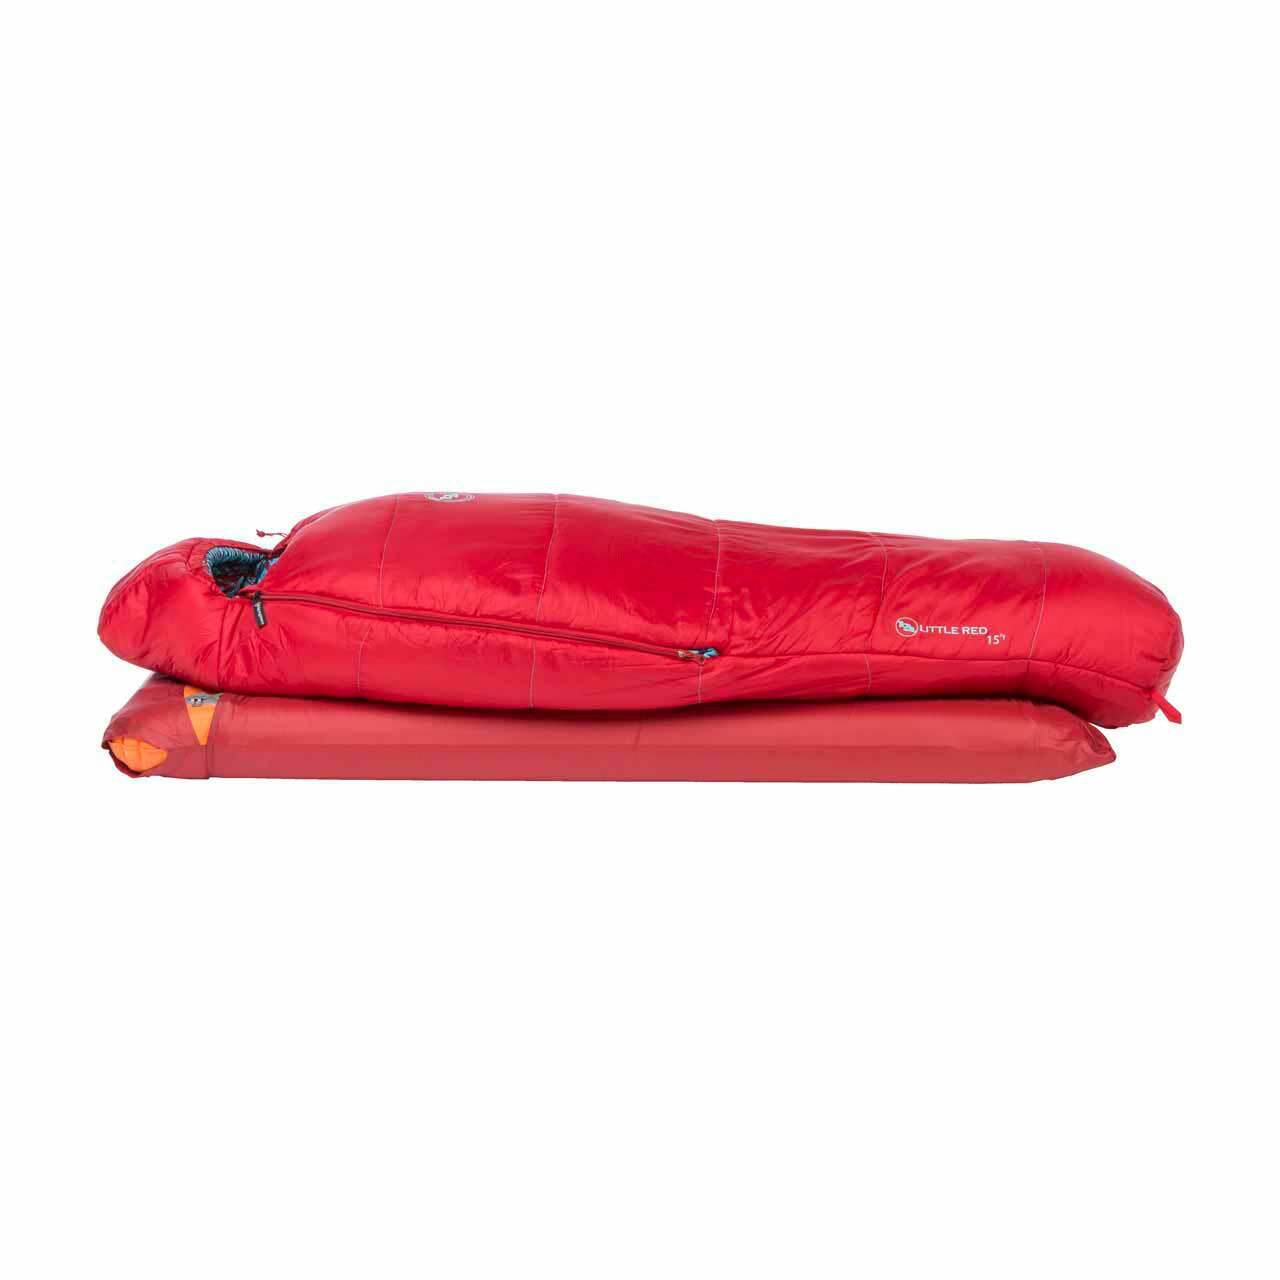 Big Agnes Little Red 15 Sleeping Bag - Used | Campman